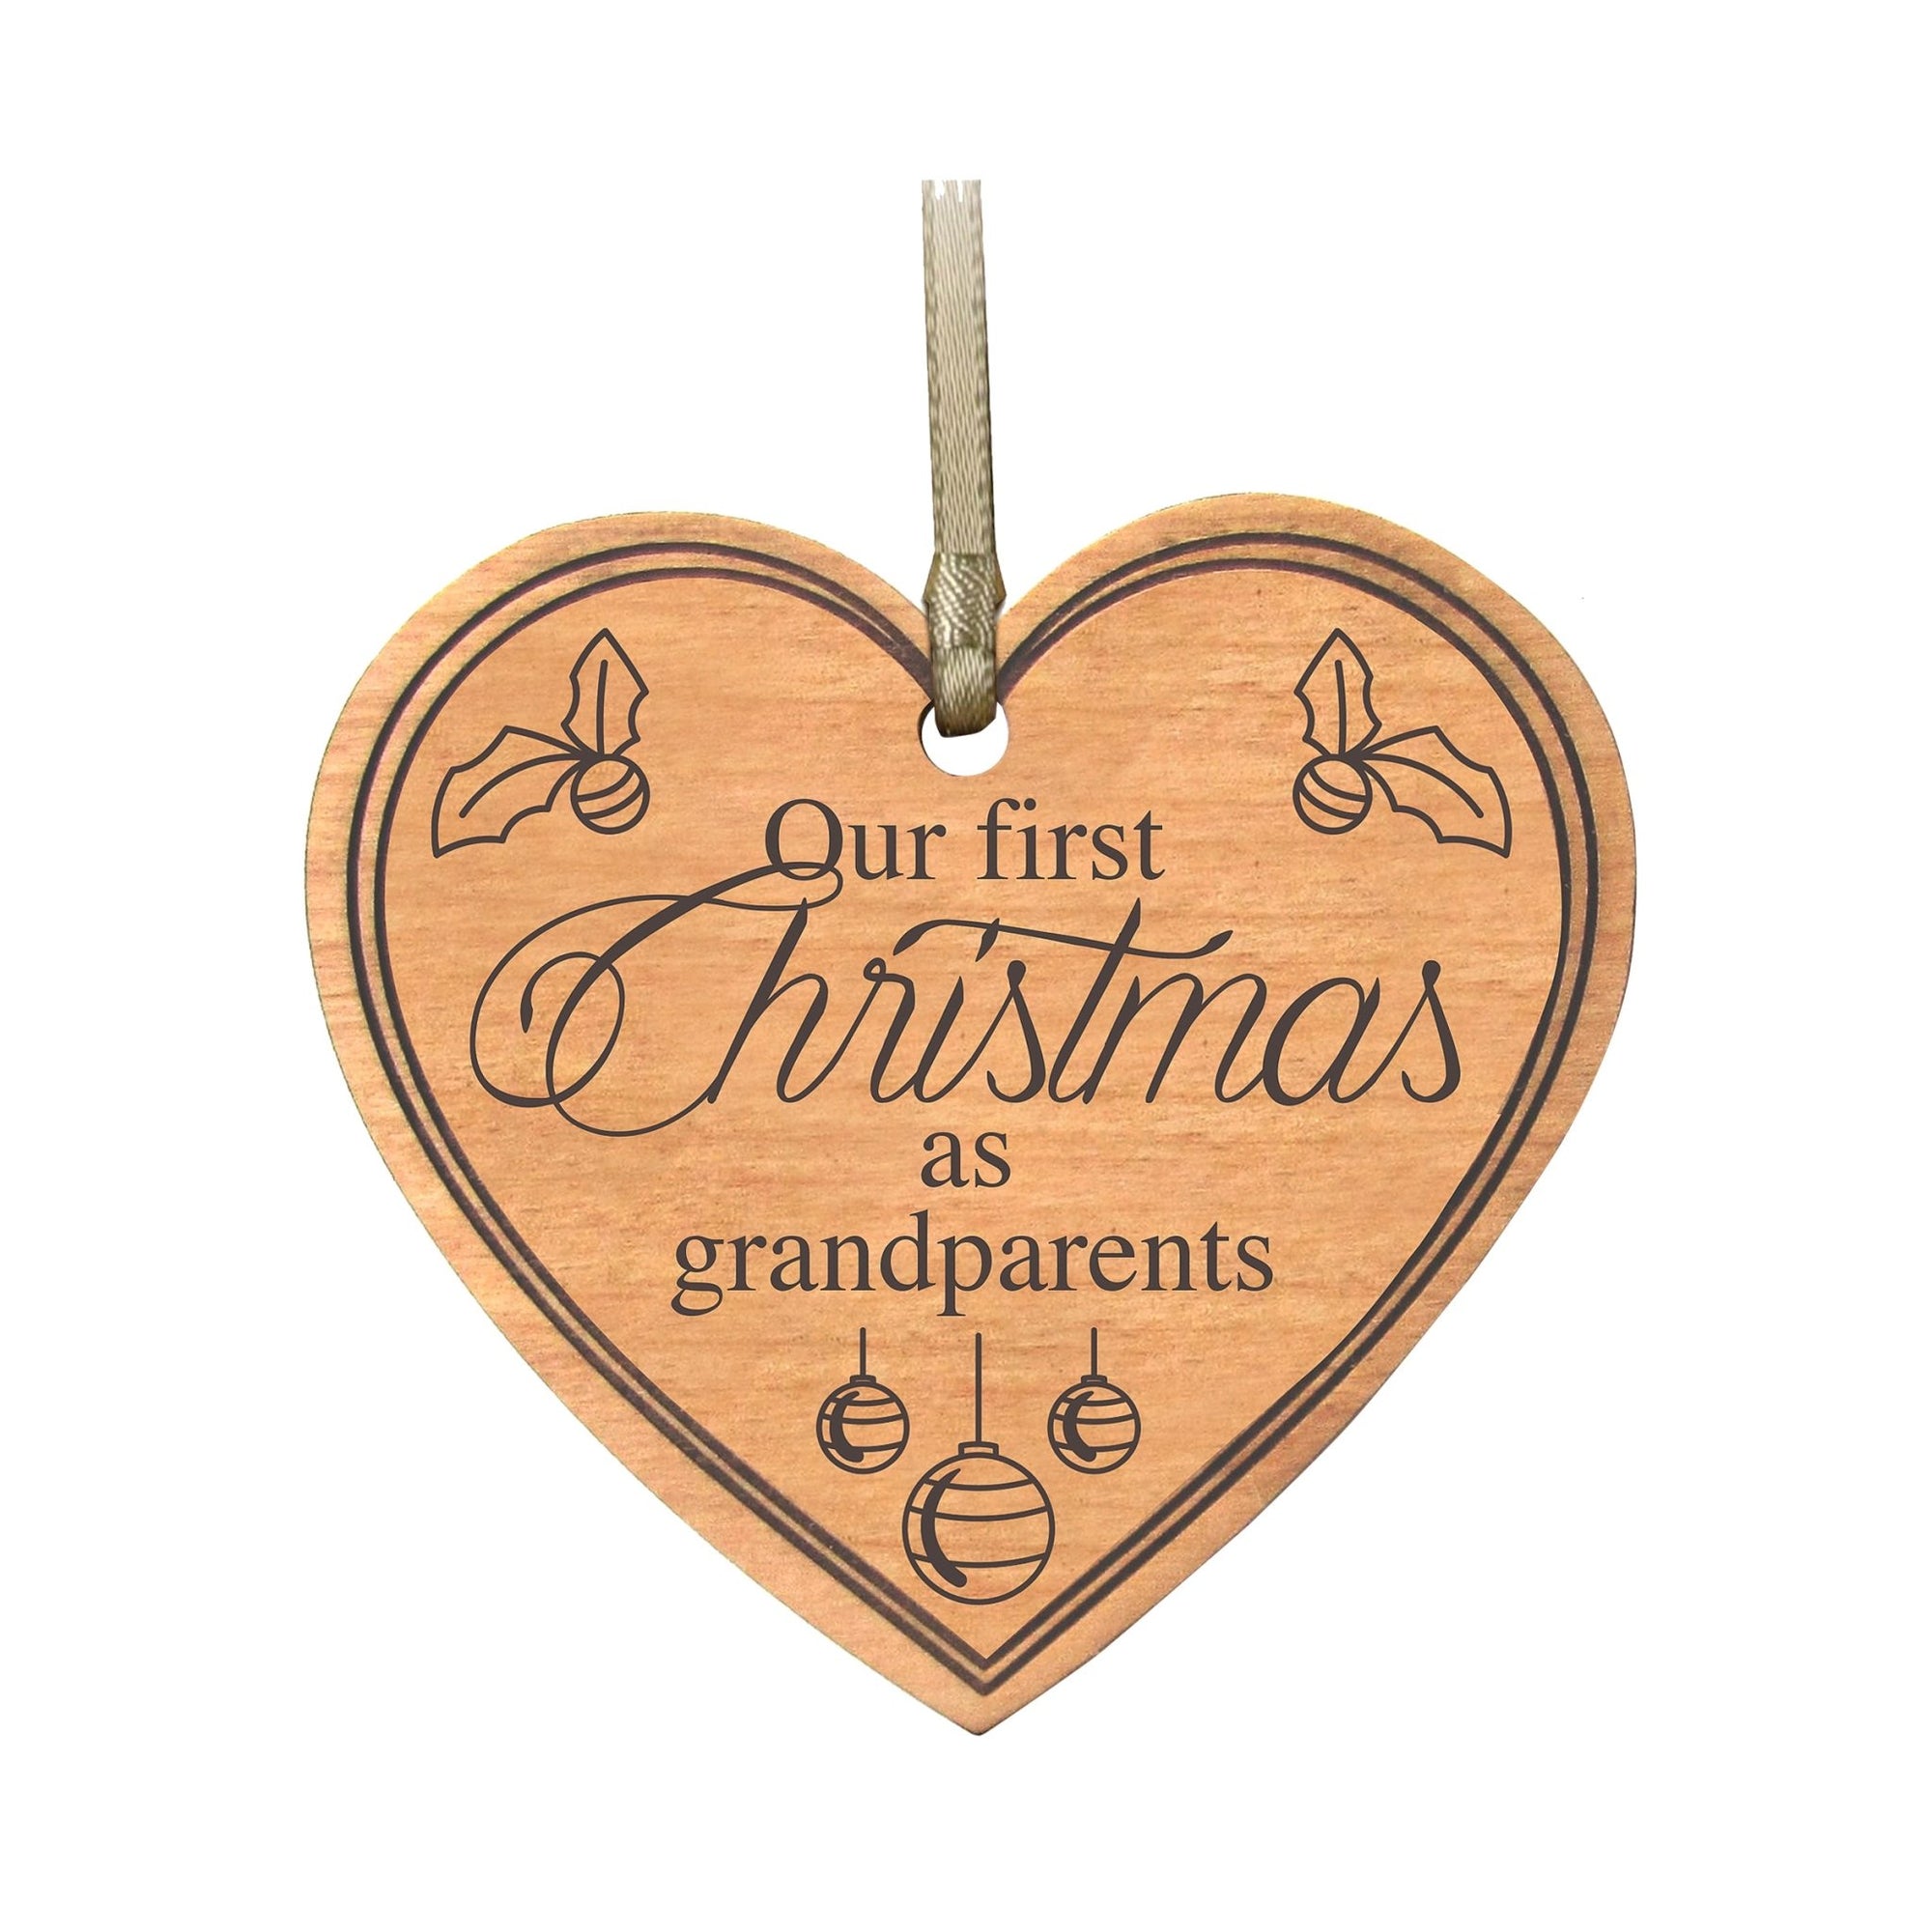 Modern 3.75in Christmas Wooden Heart Ornament for Grandparents - Our First Christmas - LifeSong Milestones